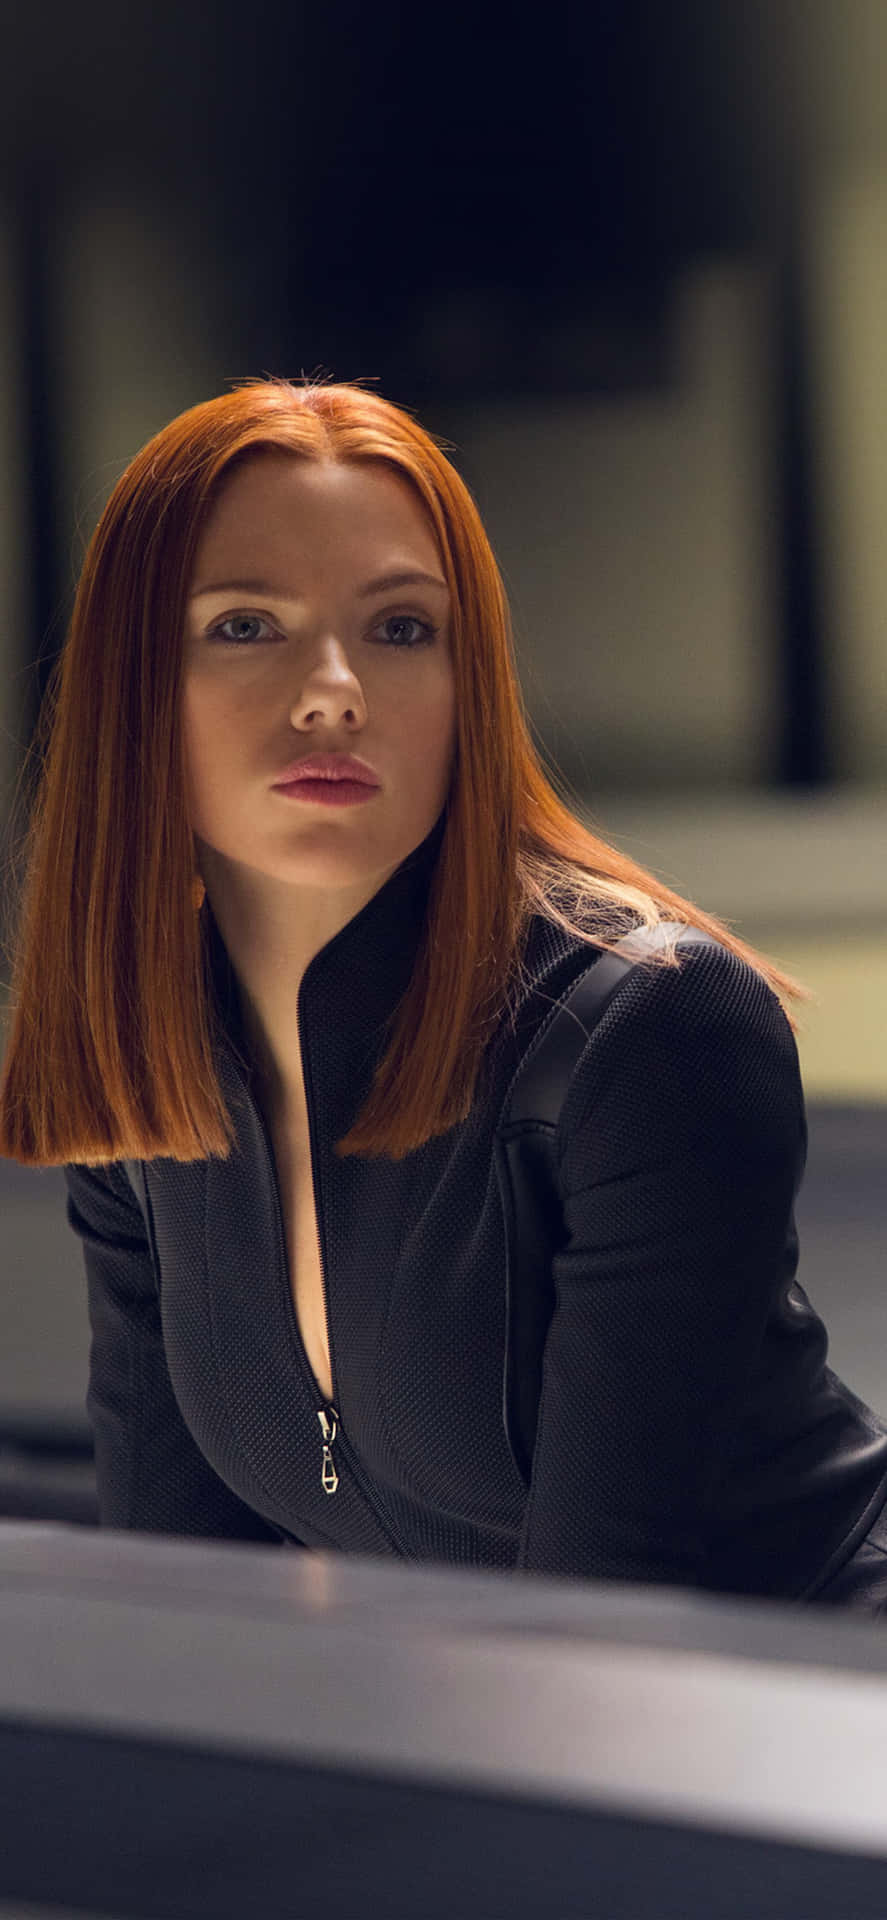 Get the Power of Black Widow in your Hands with the Iphone Wallpaper